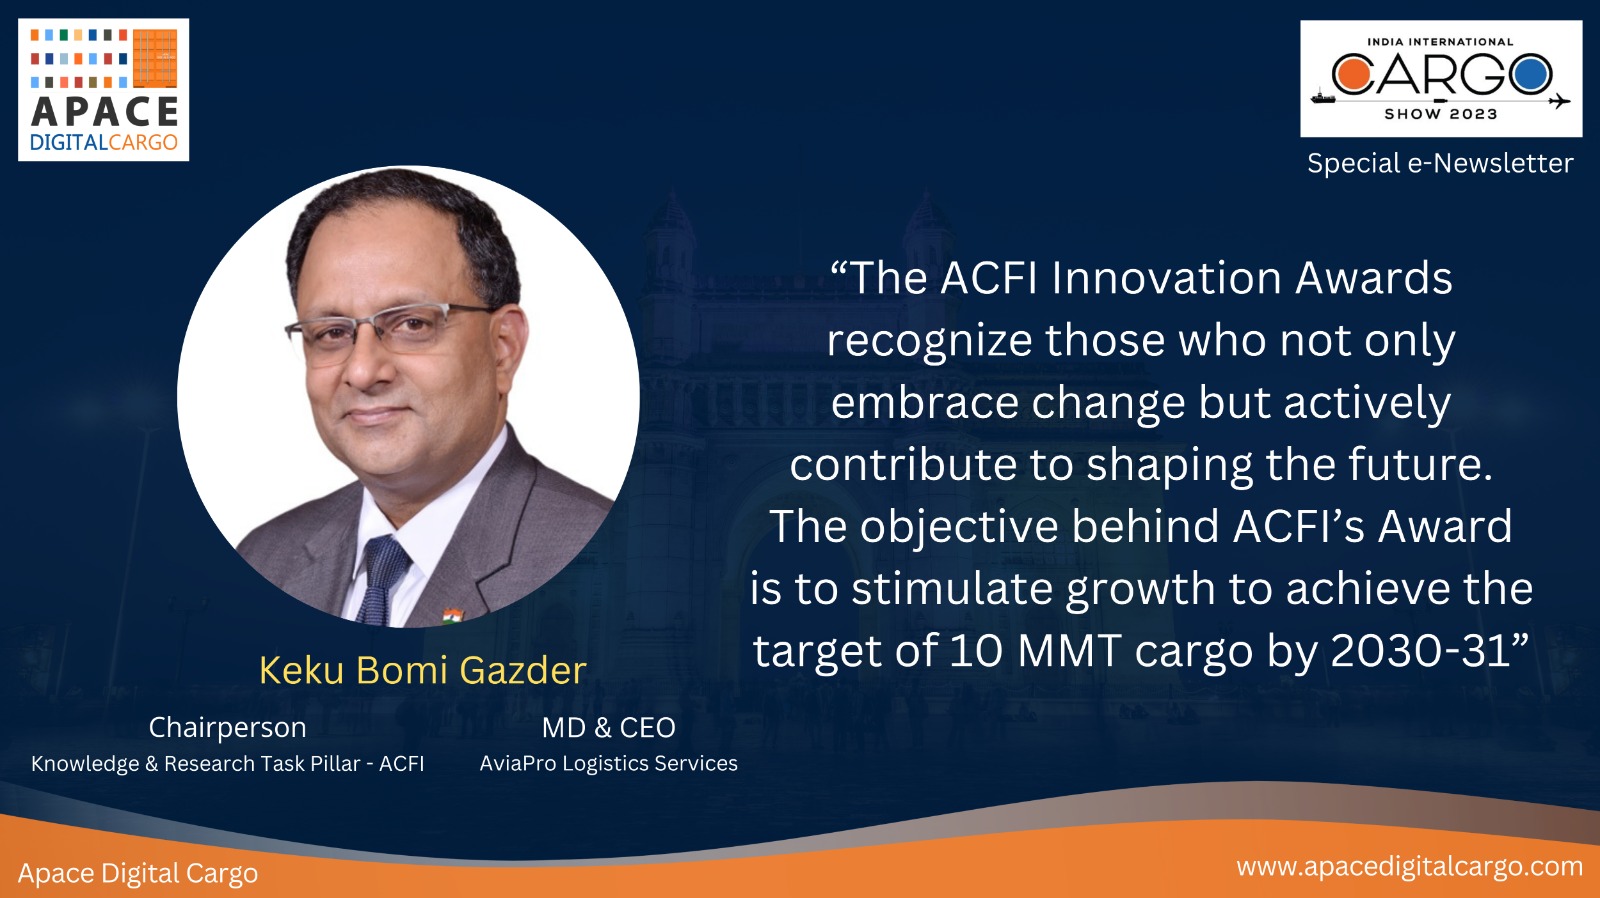 Interview with Keku Bomi Gazder, Chairperson, ACFI’s ‘Knowledge & Research Task Pillar’ and MD & CEO, AviaPro Logistics Services